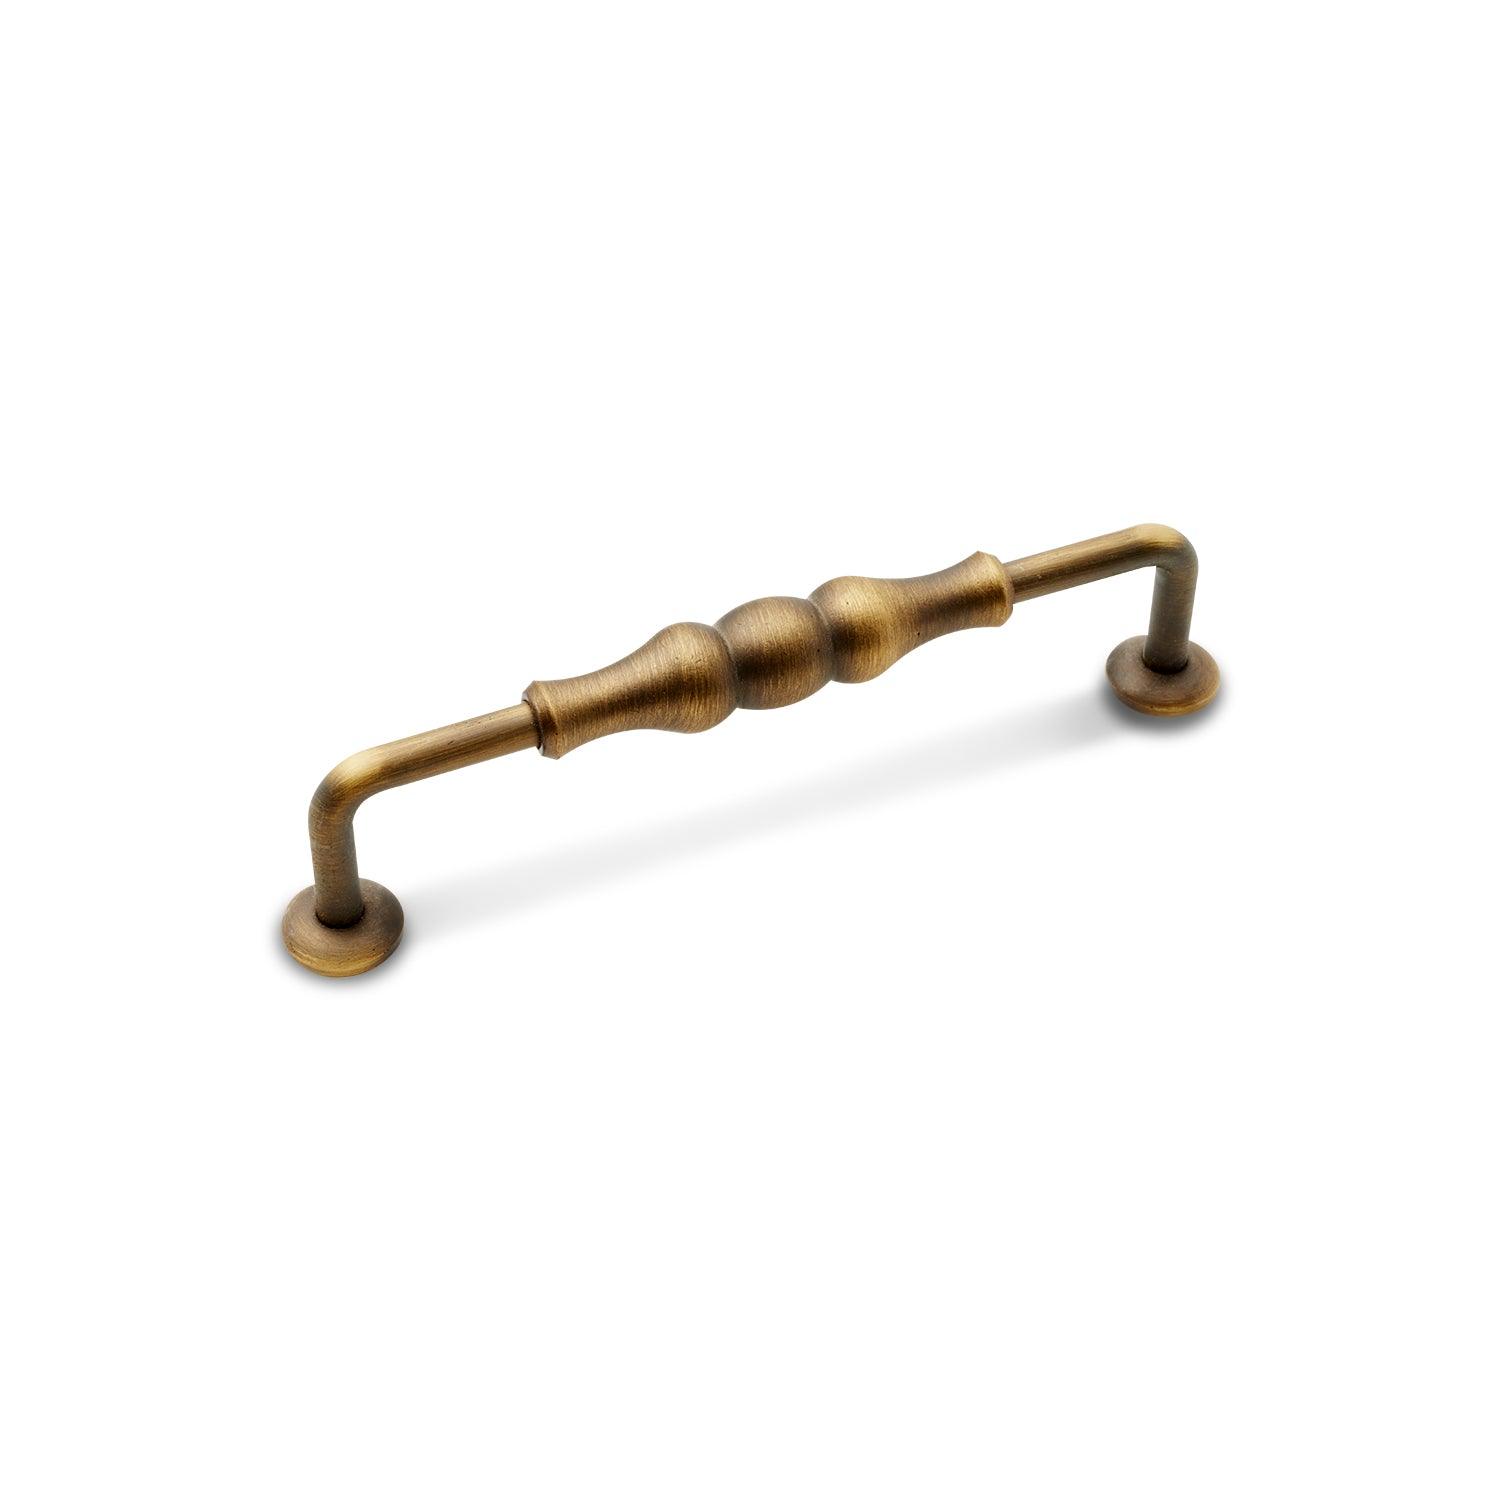 RKI - Beaded Middle Collection - Vertical Cabinet Pull - APex Hardware NY 